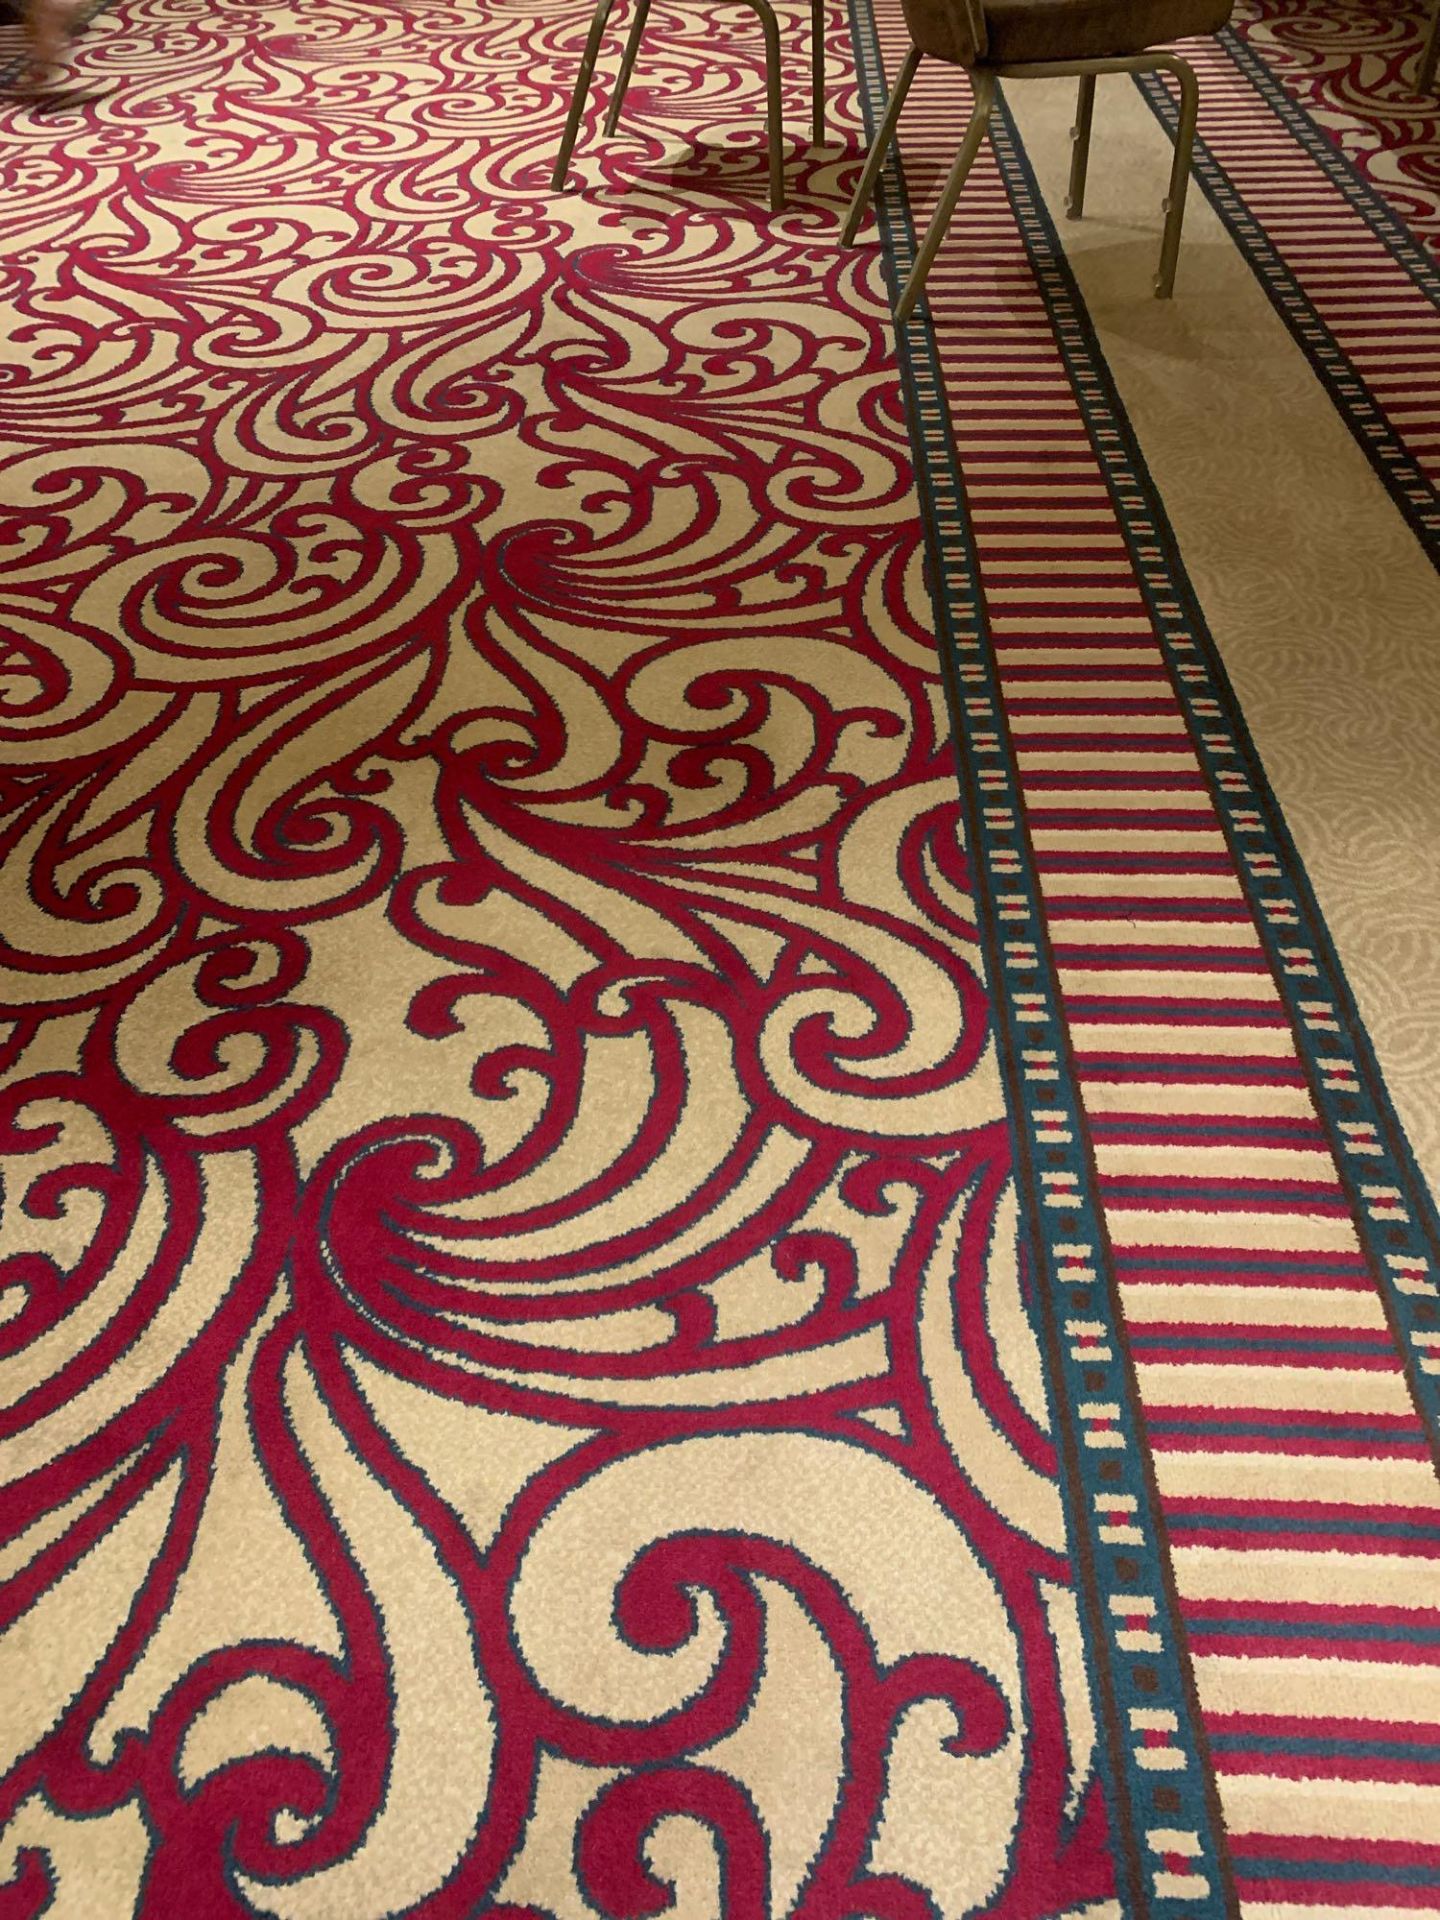 Bespoke Wood Carpet Approximately 12mx 15m Beige Field Carpet With Red Bold Medallions With A - Image 2 of 4